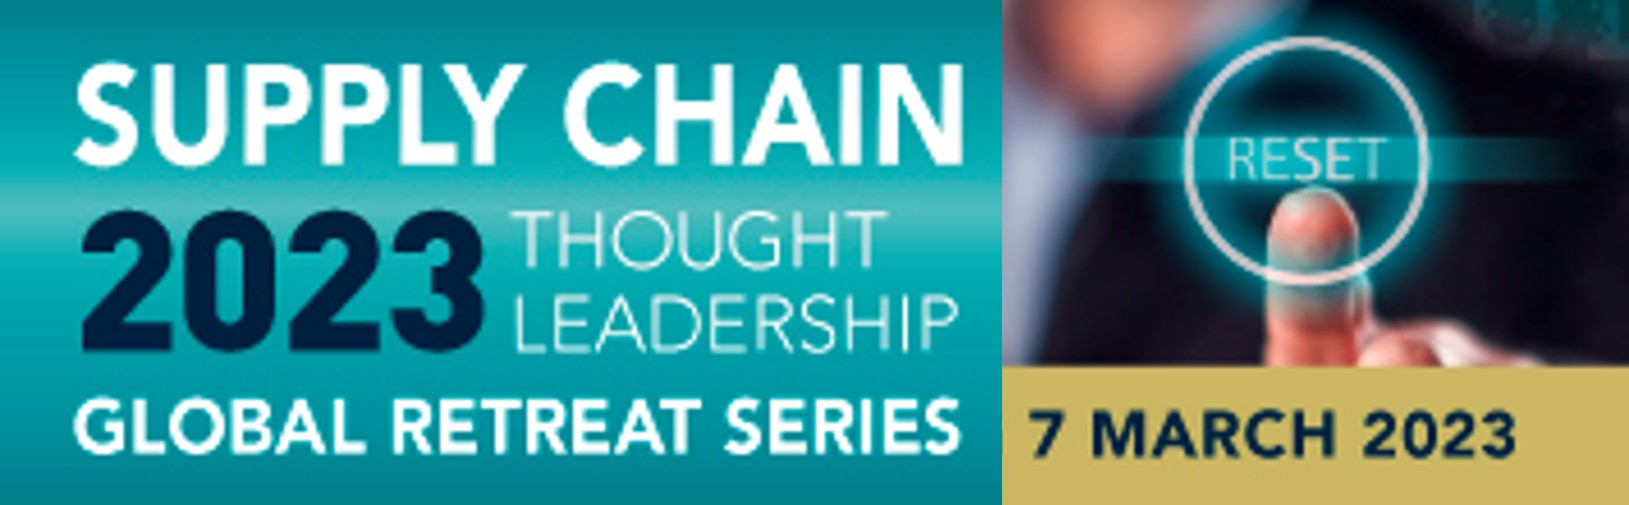 GA Global Supply Chain 'Thought Leadership' Retreat 2023 - South Africa